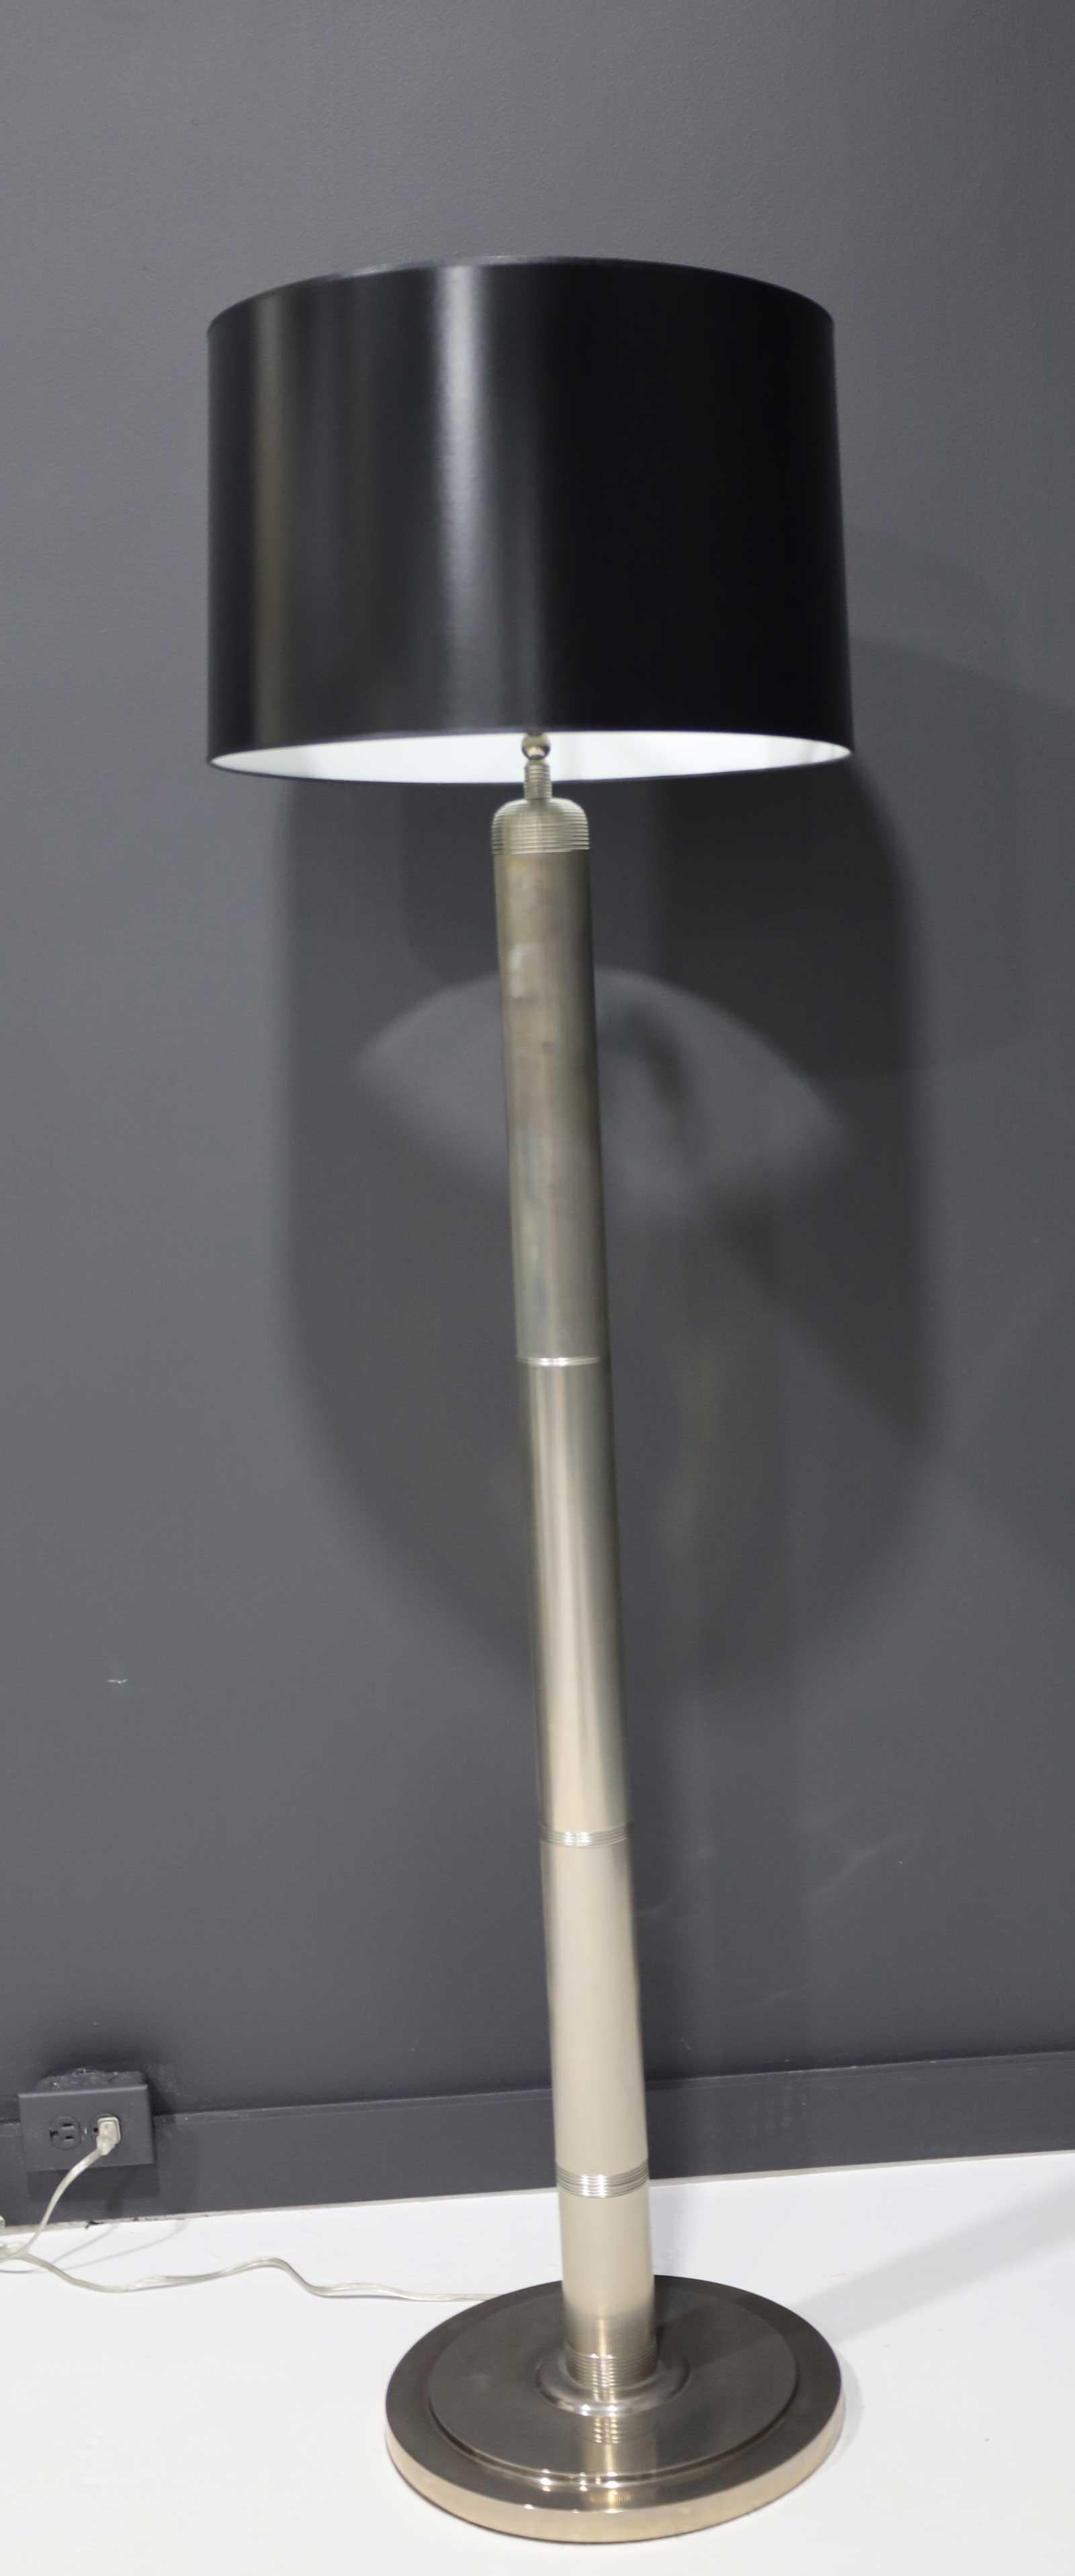 Hollywood Regency Long Acre Floor Lamp by Thomas O'Brien for Visual Comfort